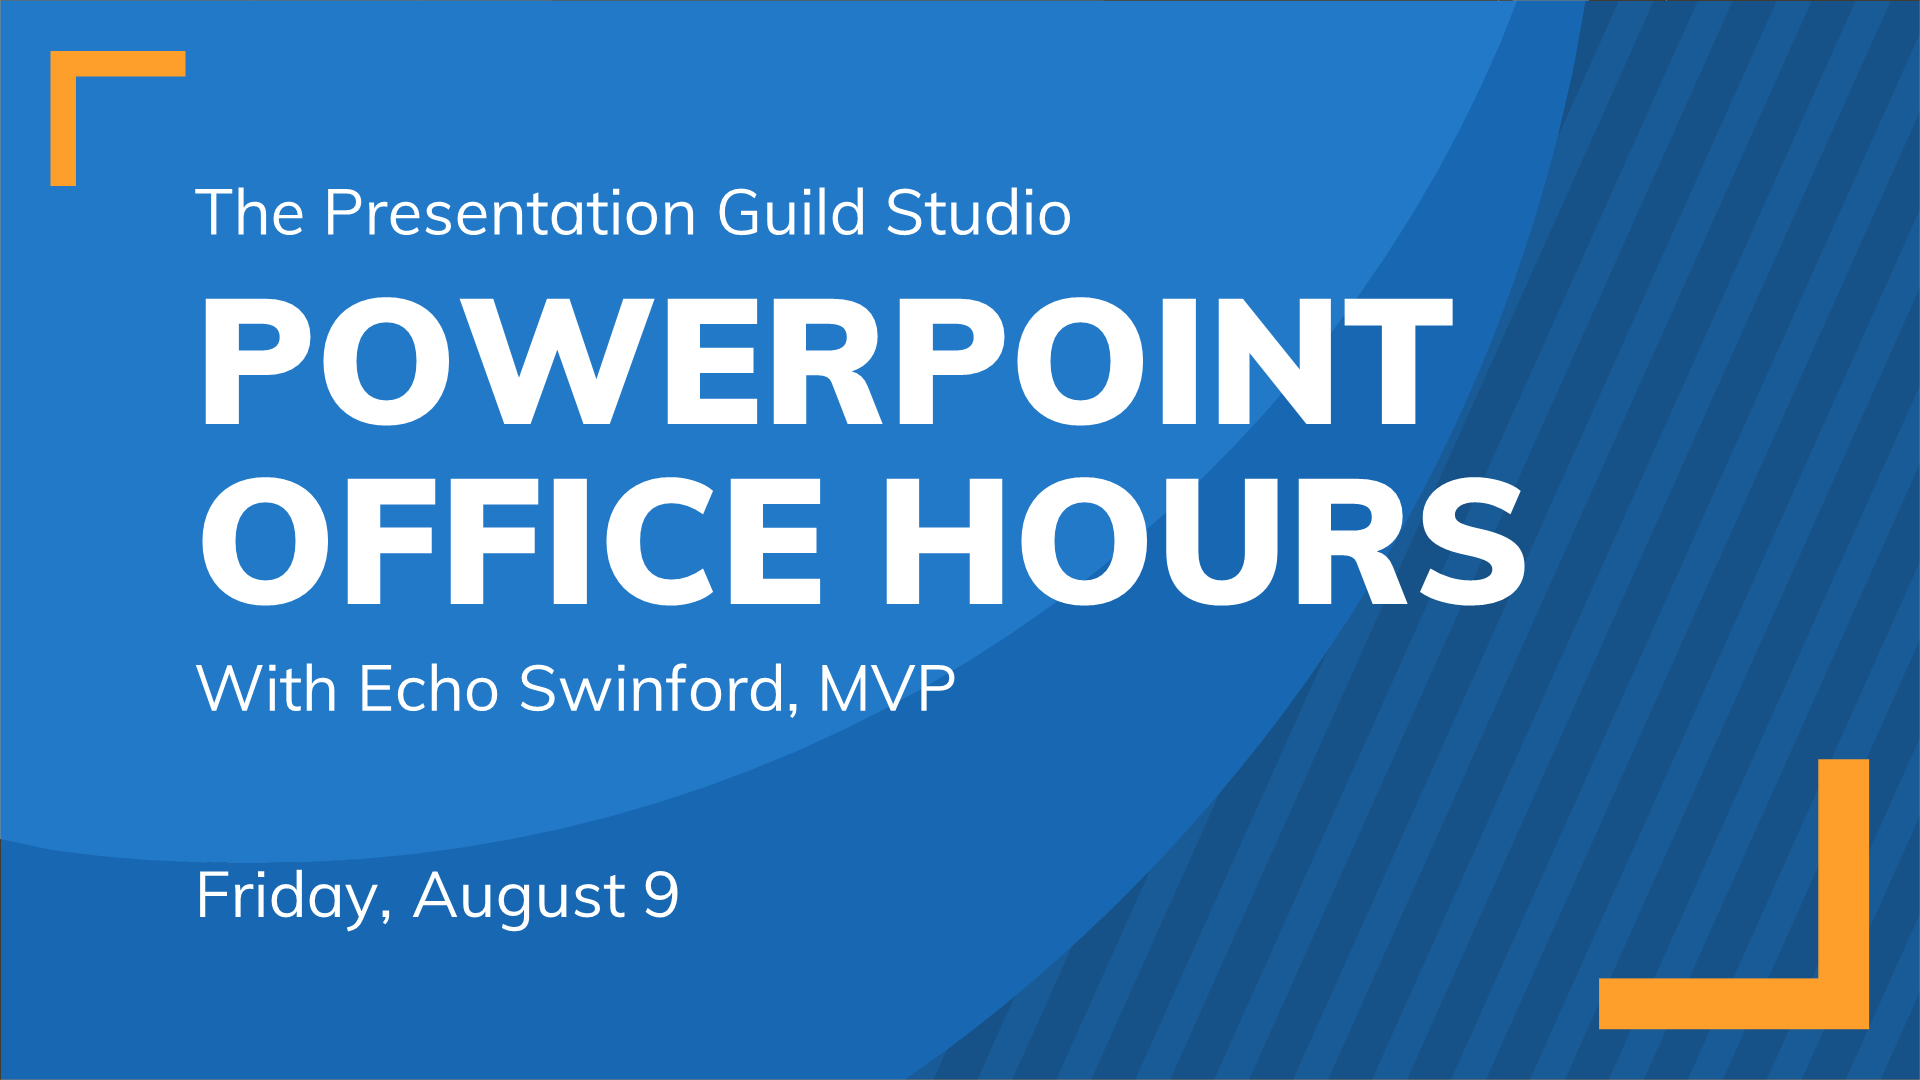 PowerPoint Office Hours: Friday, August 9